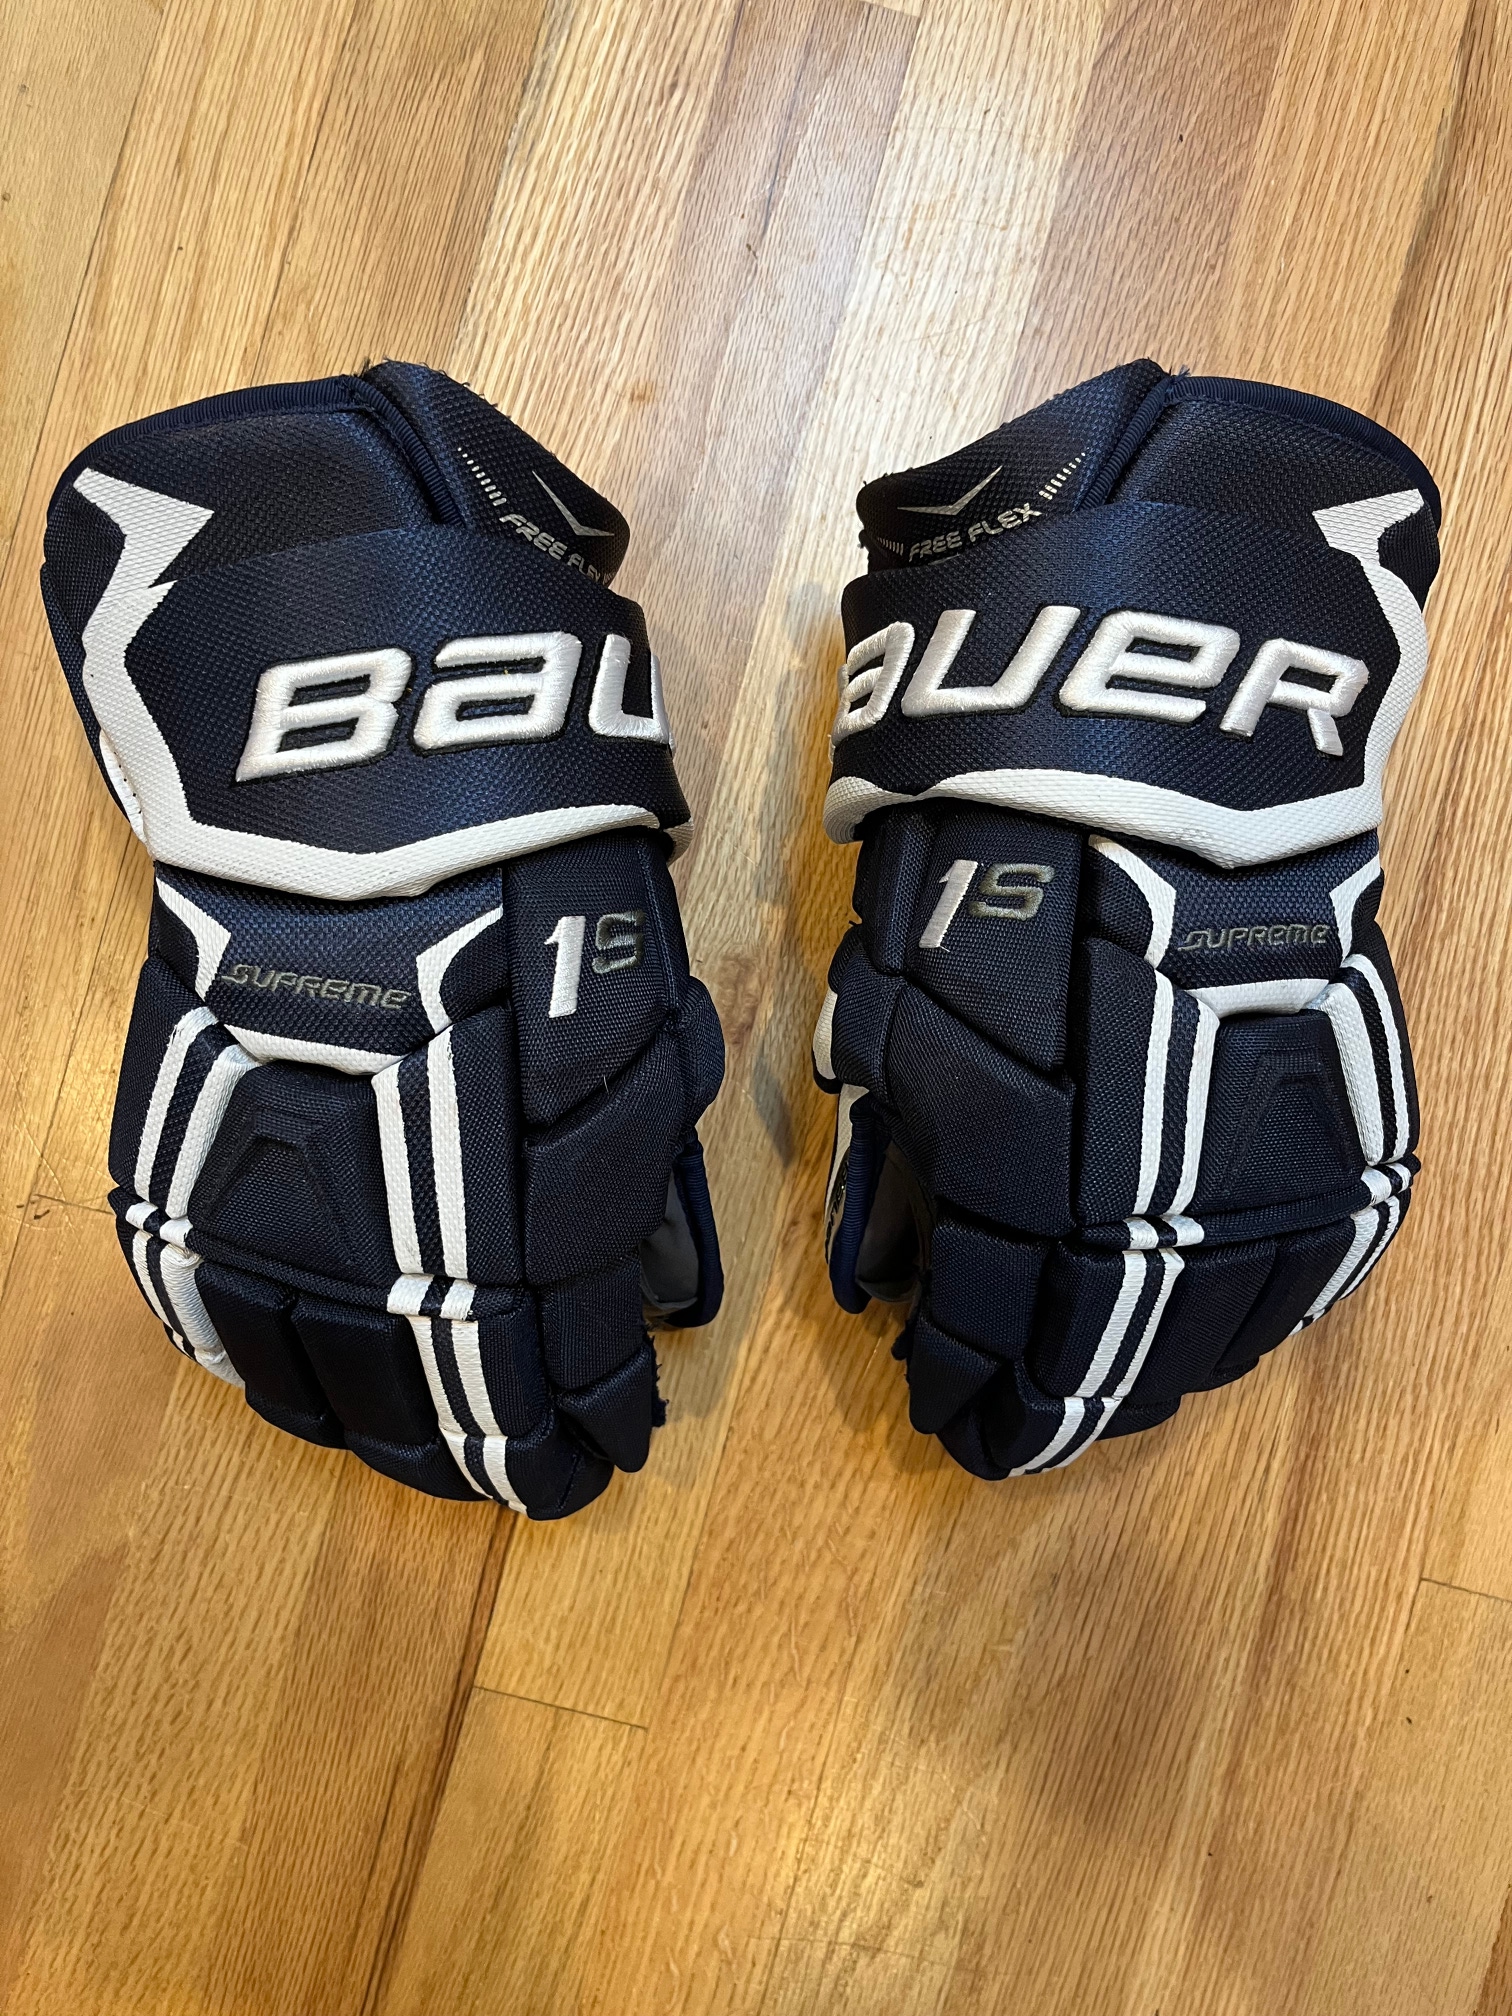 Used Bauer Supreme 1S Gloves 15"